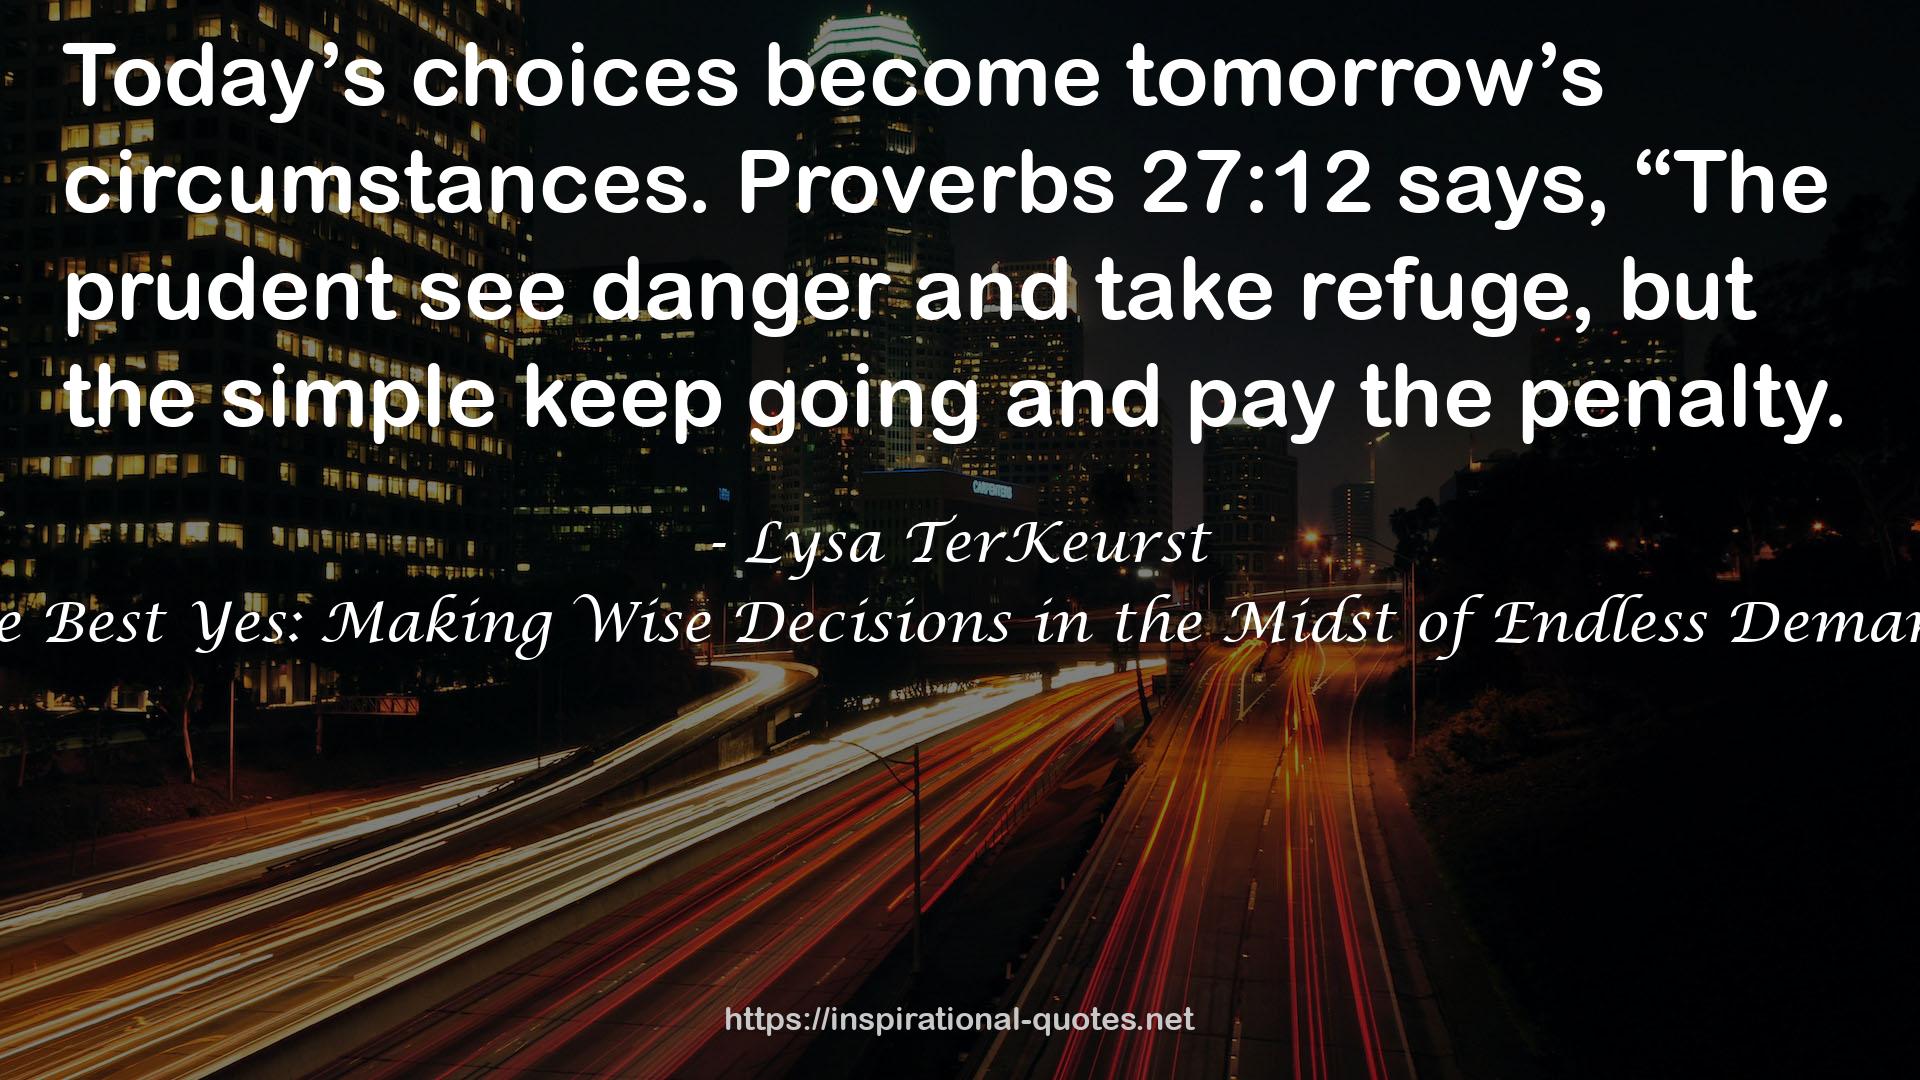 The Best Yes: Making Wise Decisions in the Midst of Endless Demands QUOTES